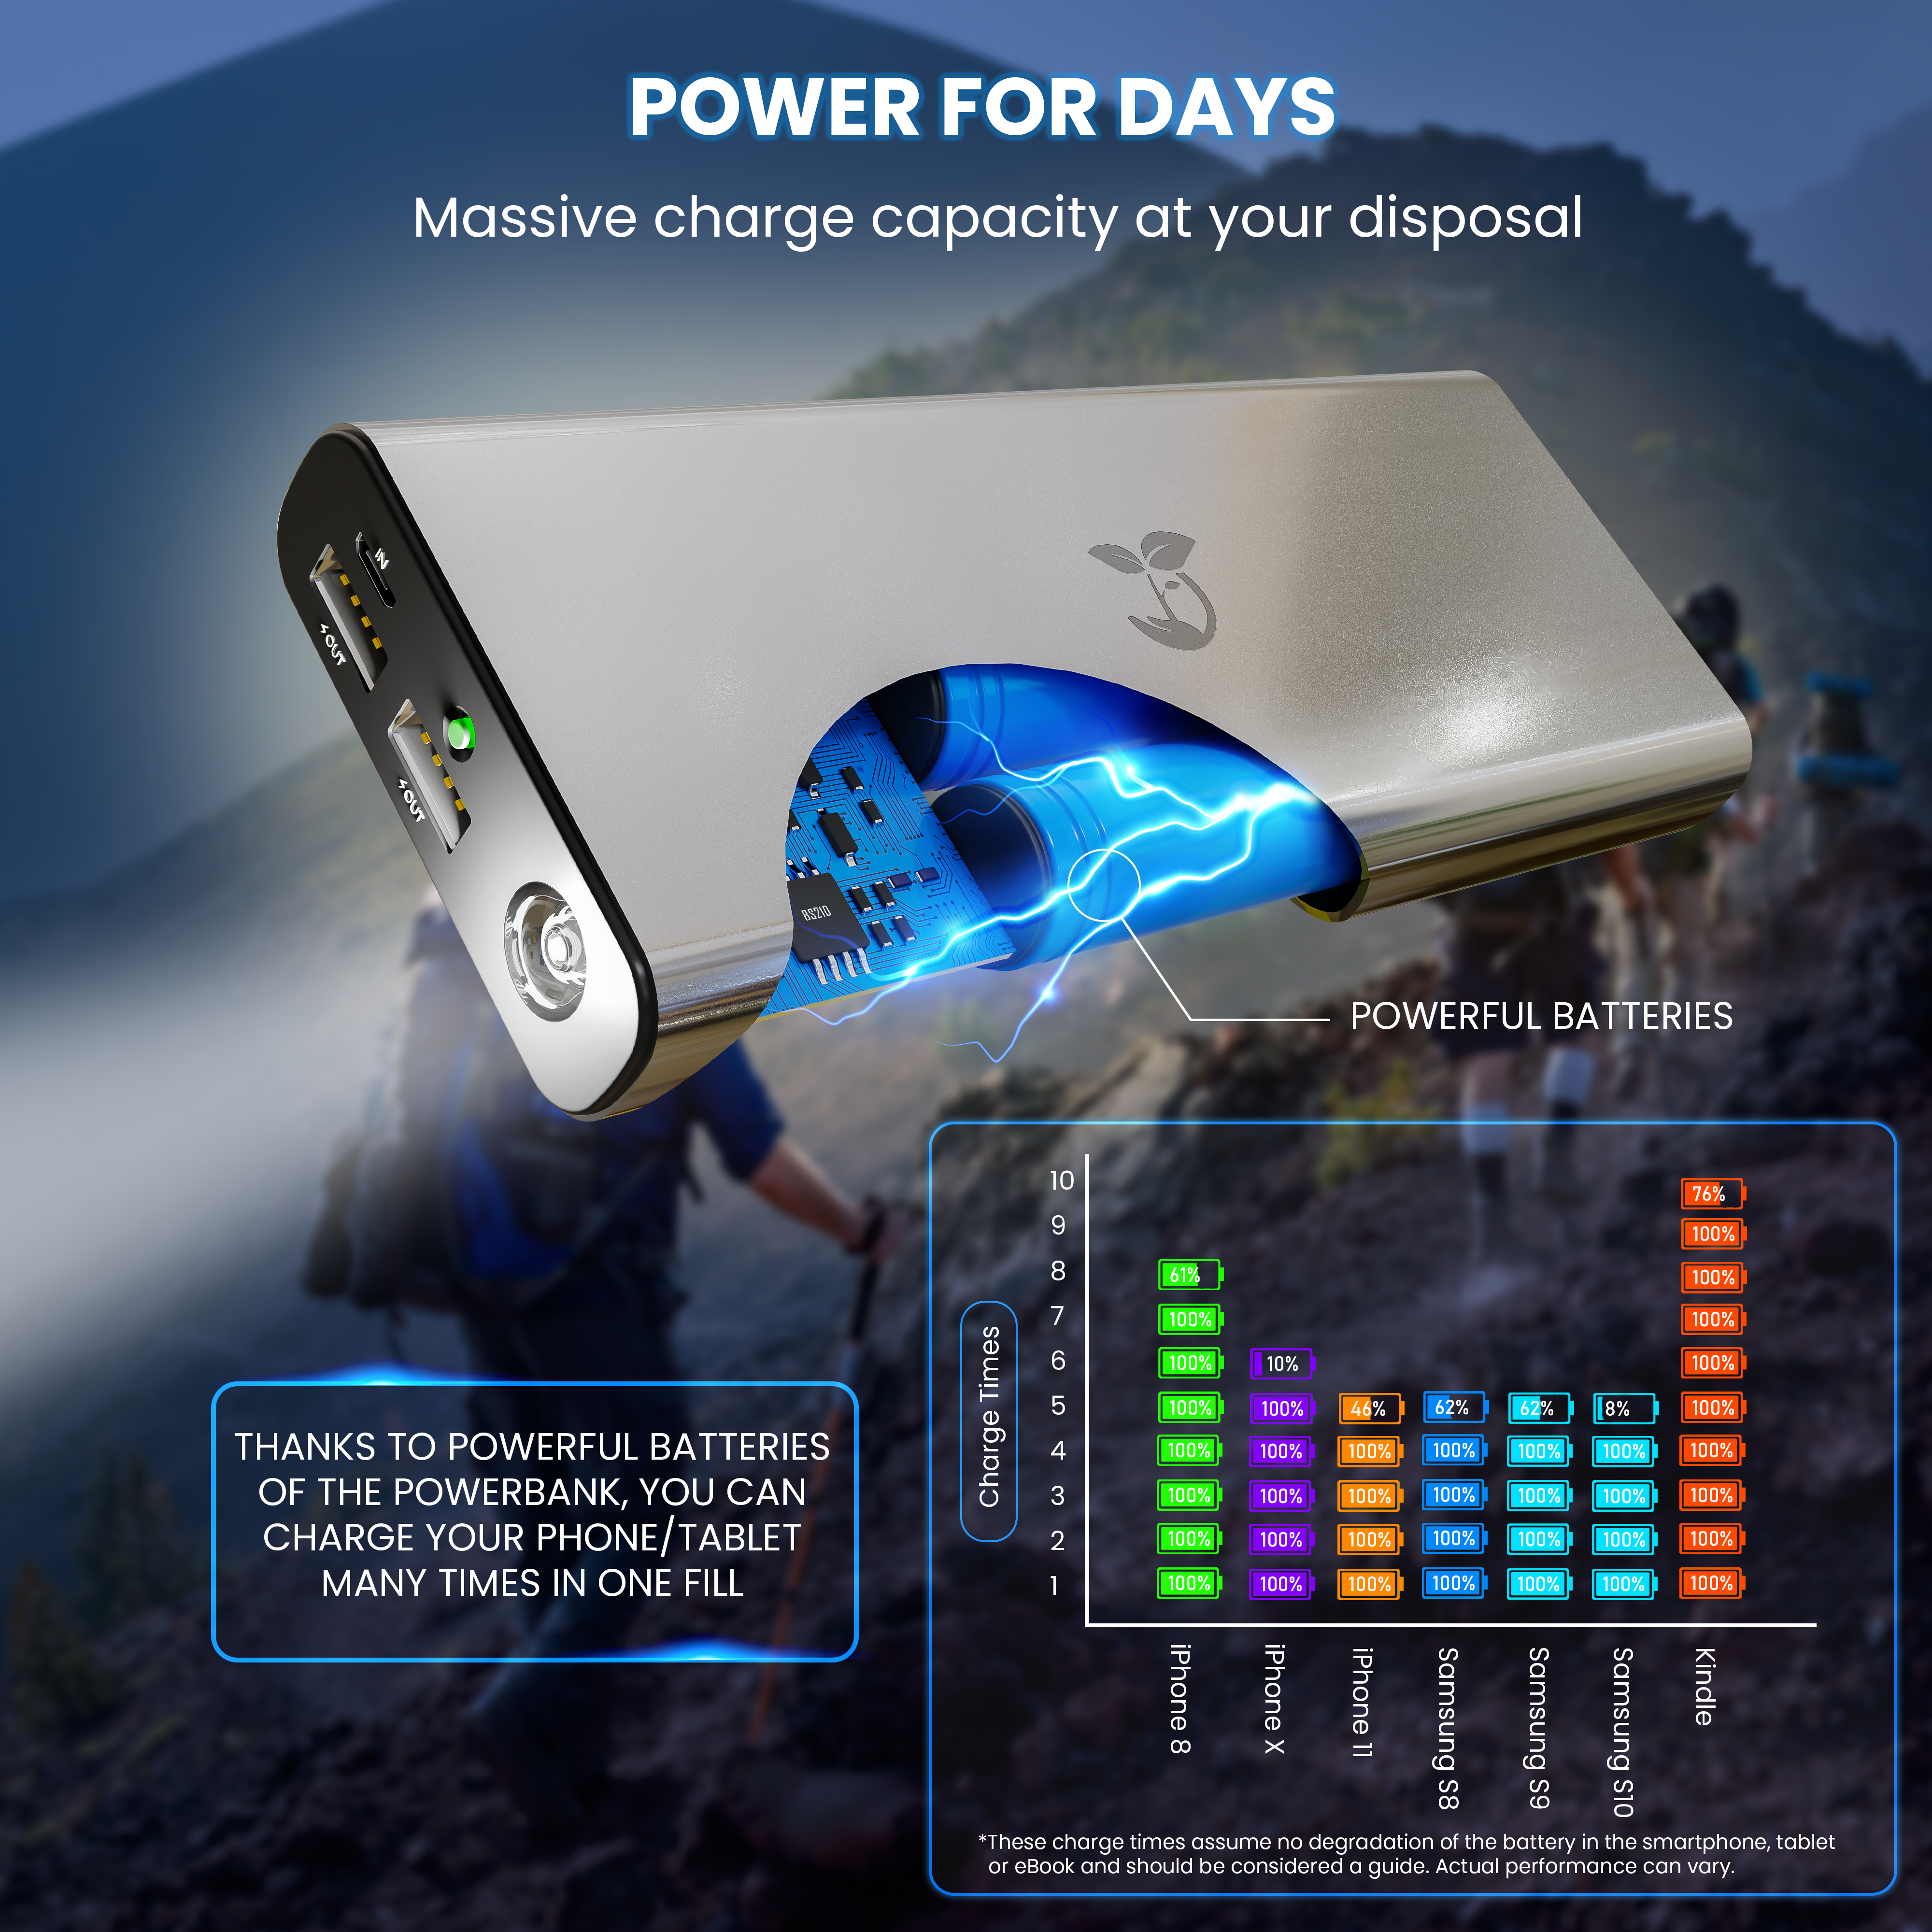 Brothers4Change Titani powerbank charge times per device